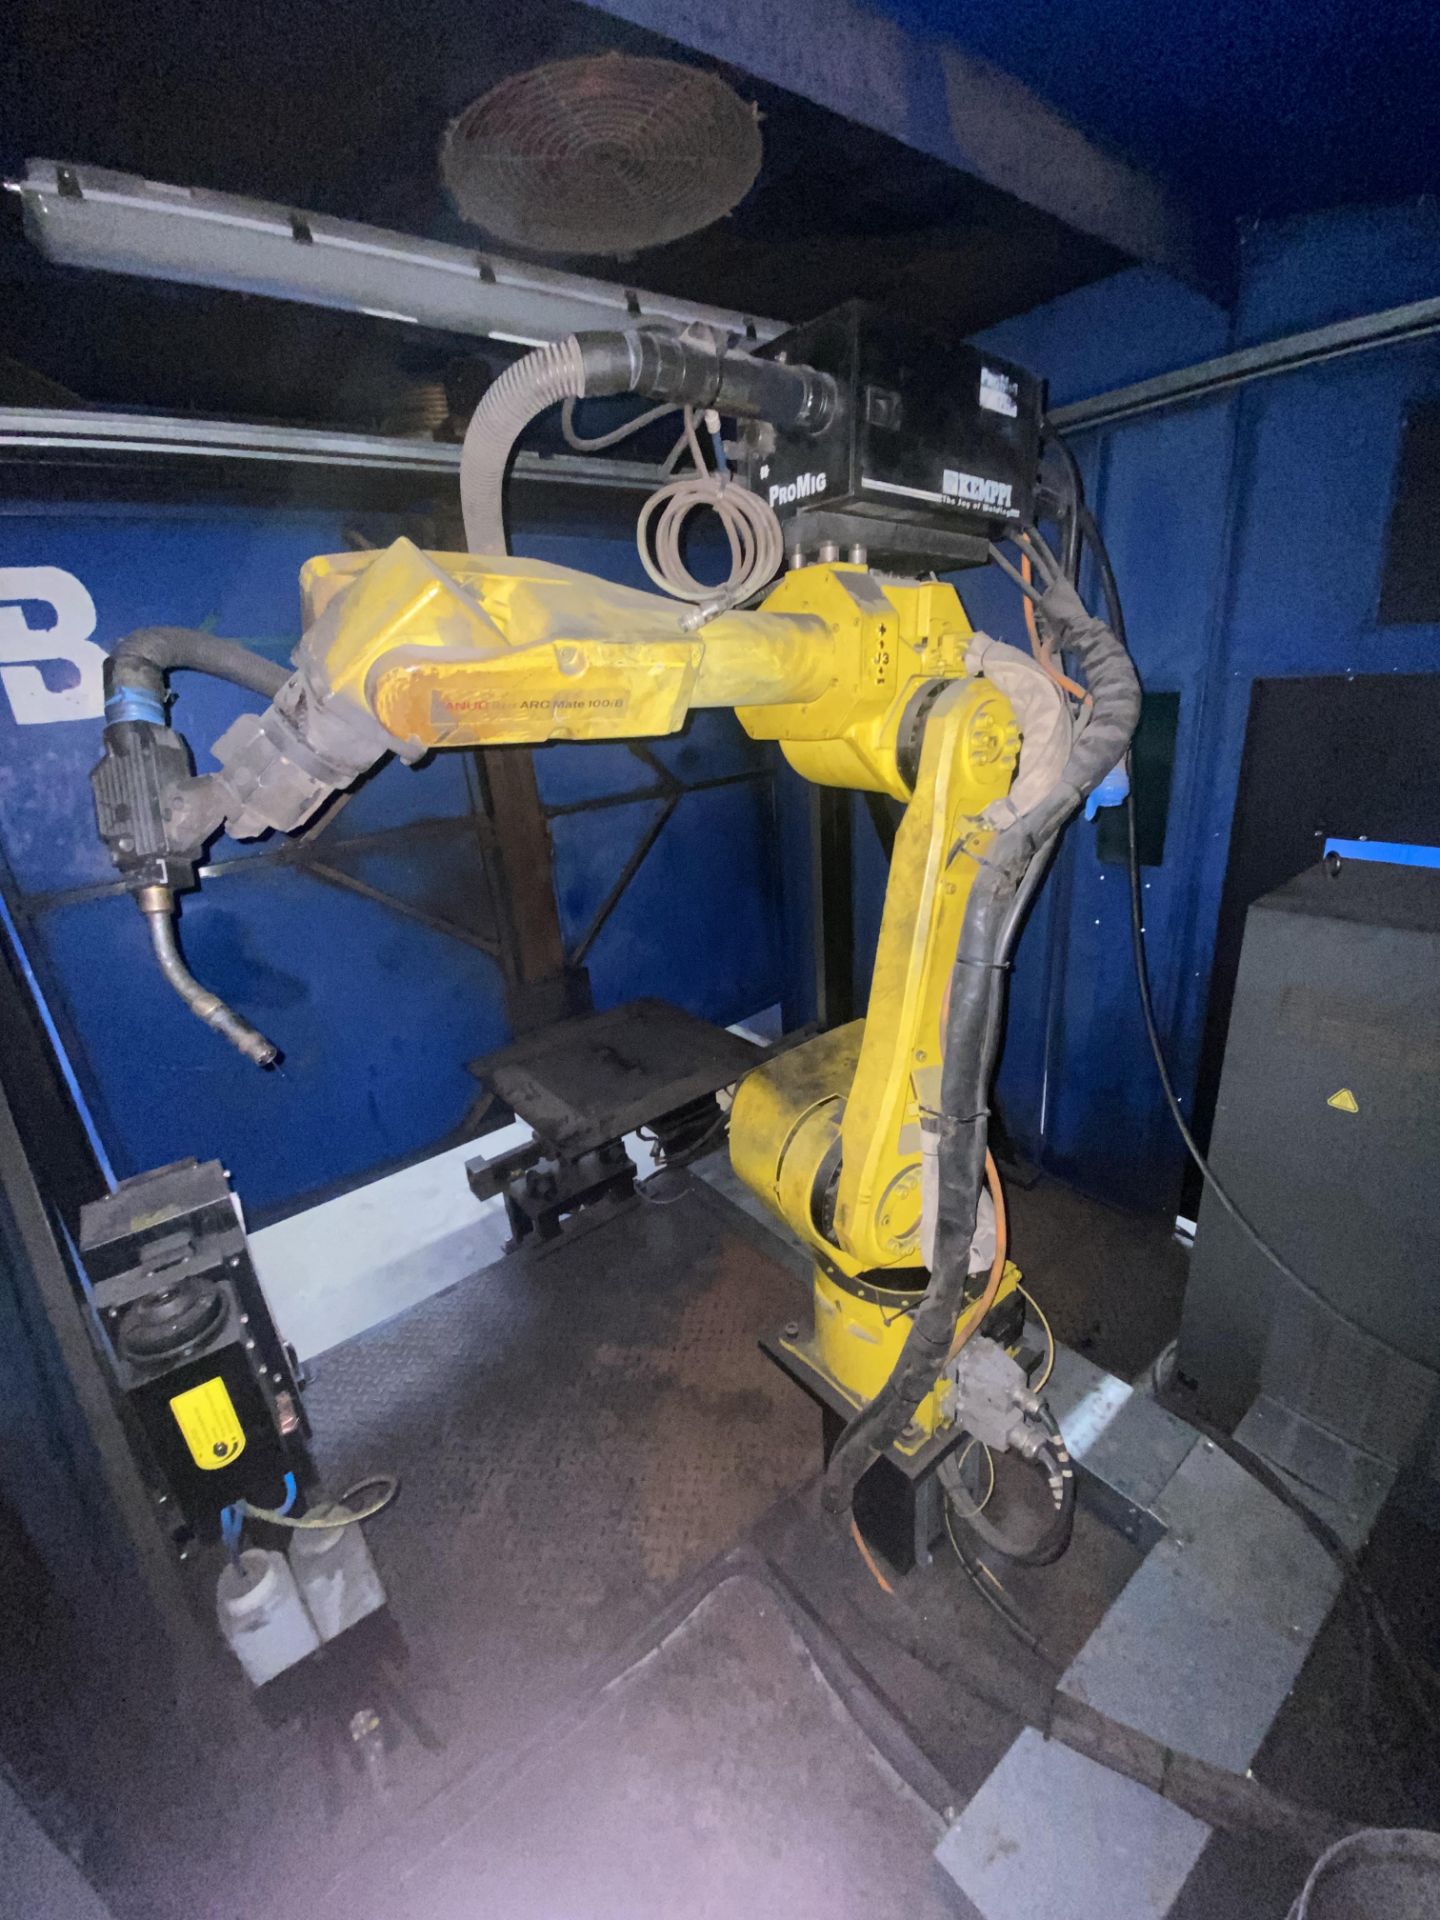 Comau ROBOT WELDING CELL, with Fanuc ROBOTARC Mate 100ib robot, Kemppi Promig 120R power source, - Image 8 of 11